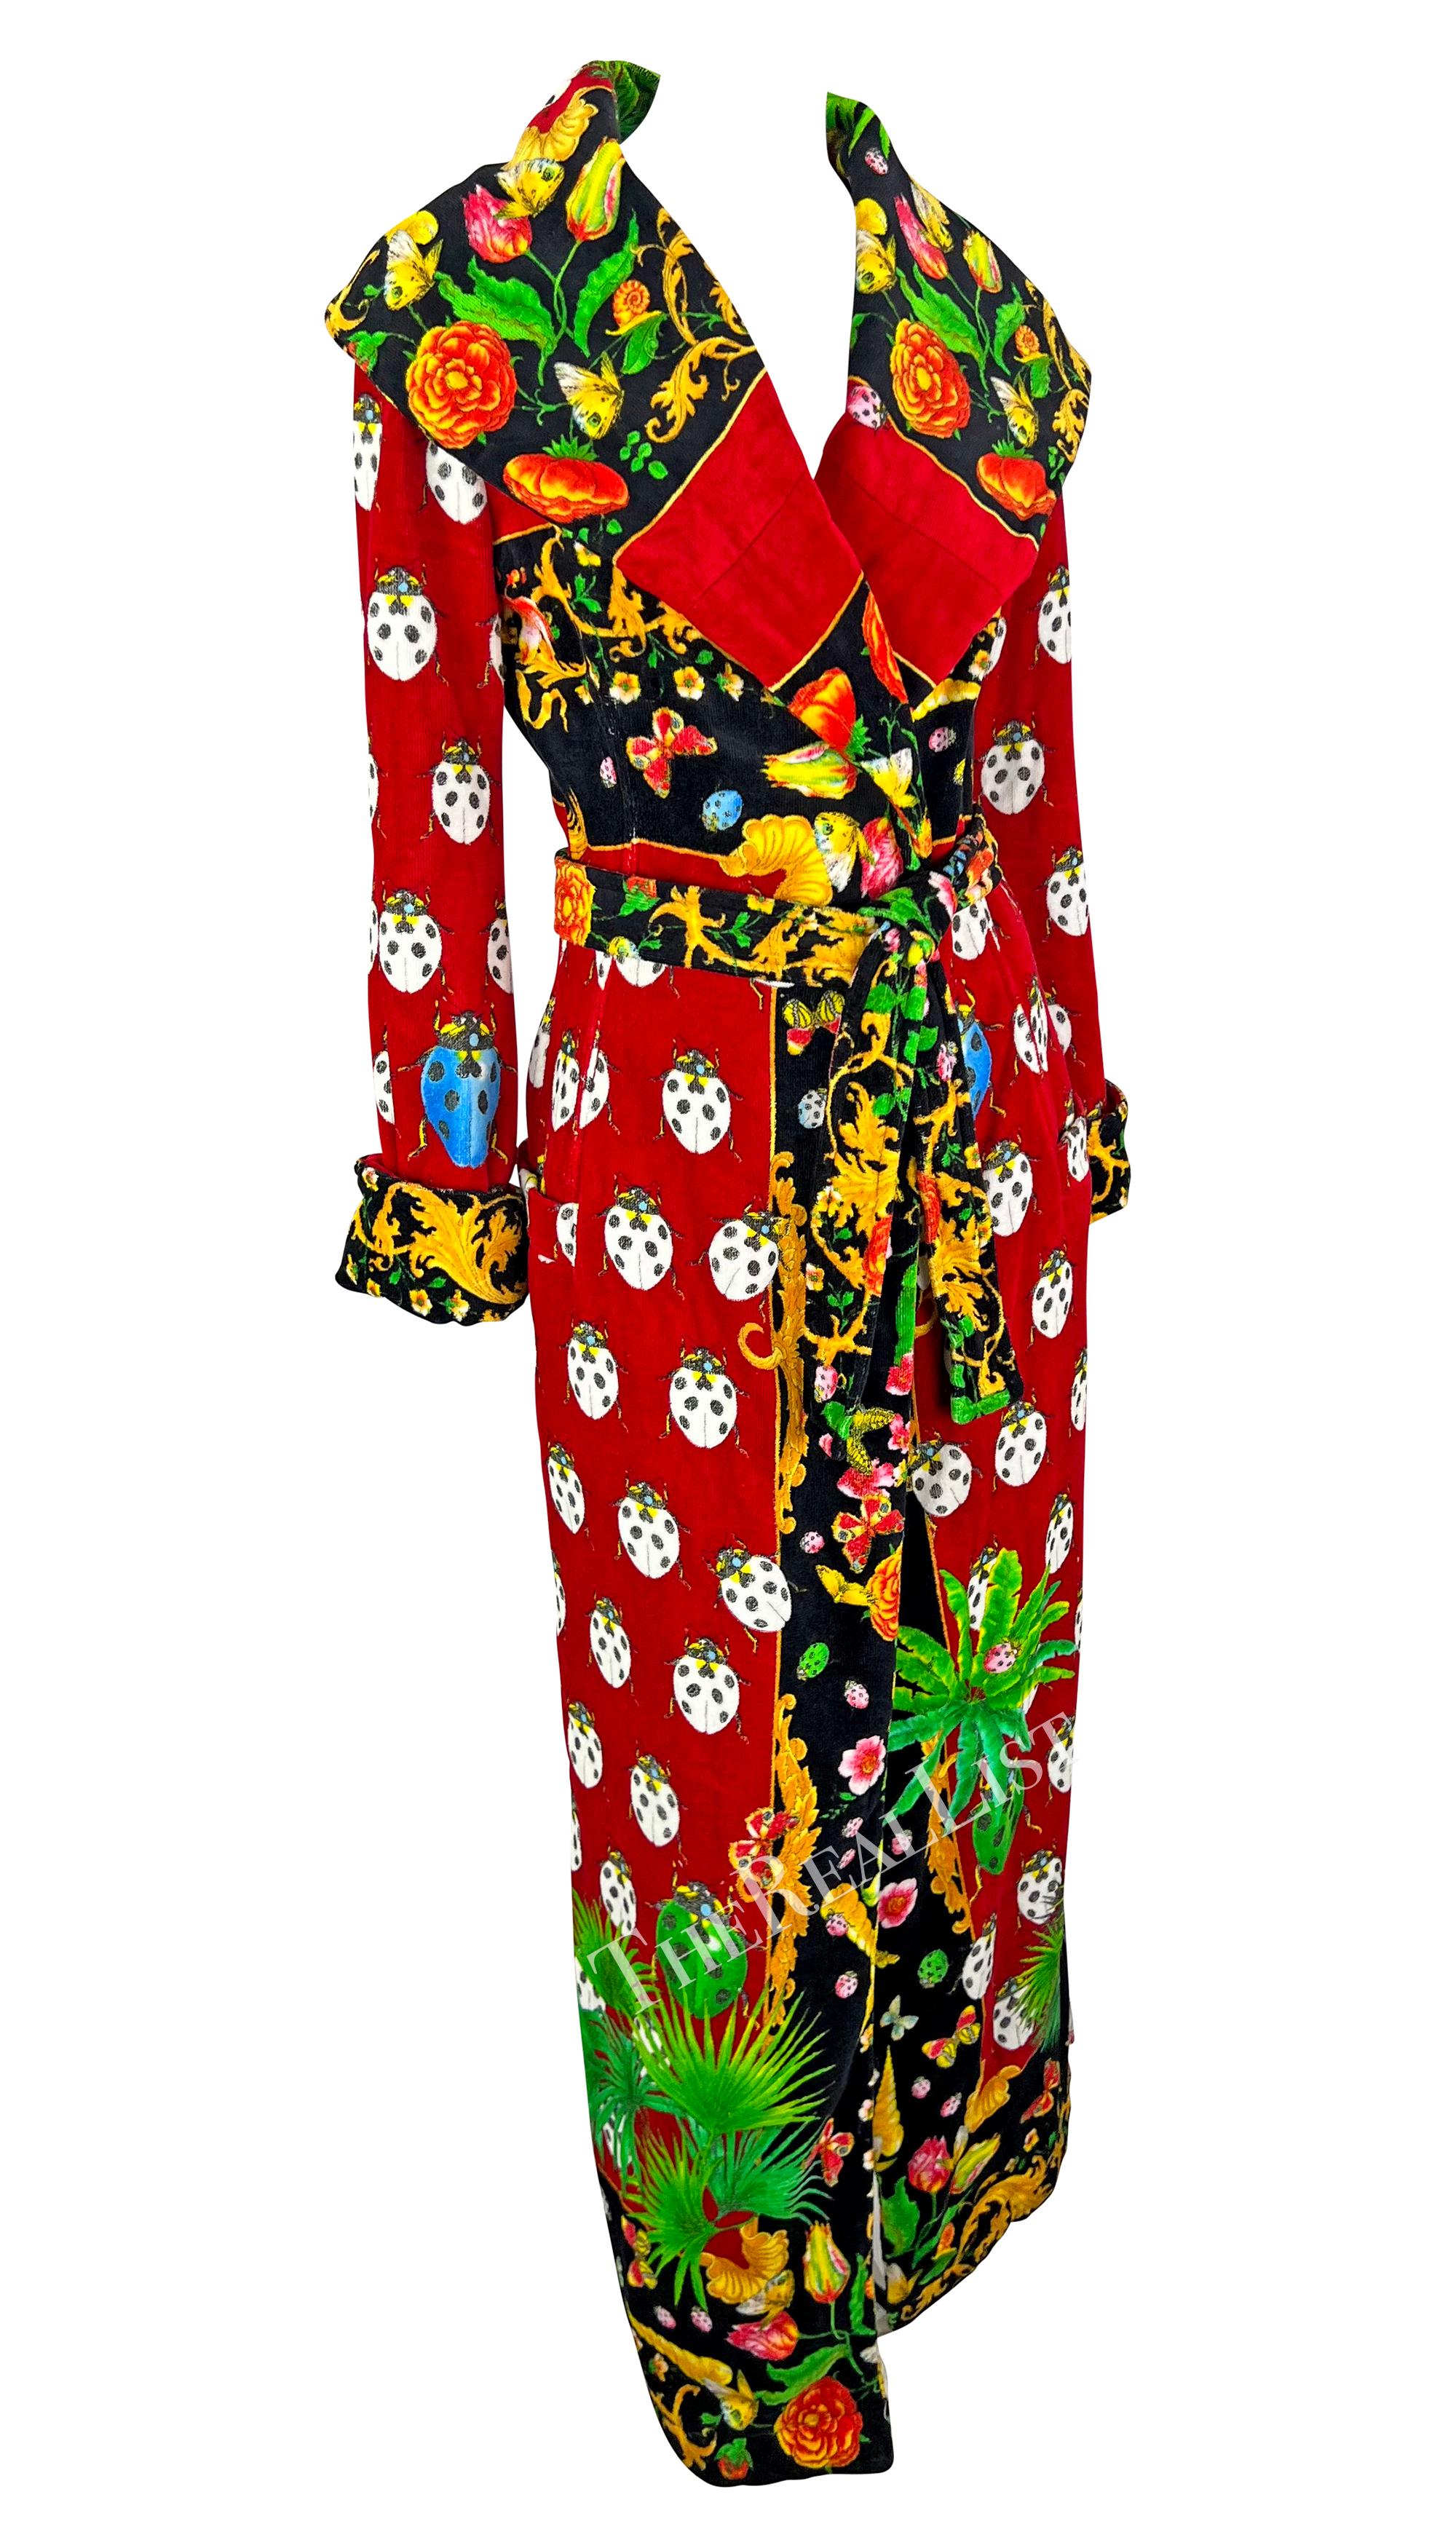 S/S 1995 Gianni Versace Red Lady Bug Print Corset Boned Terrycloth Robe For Sale 8